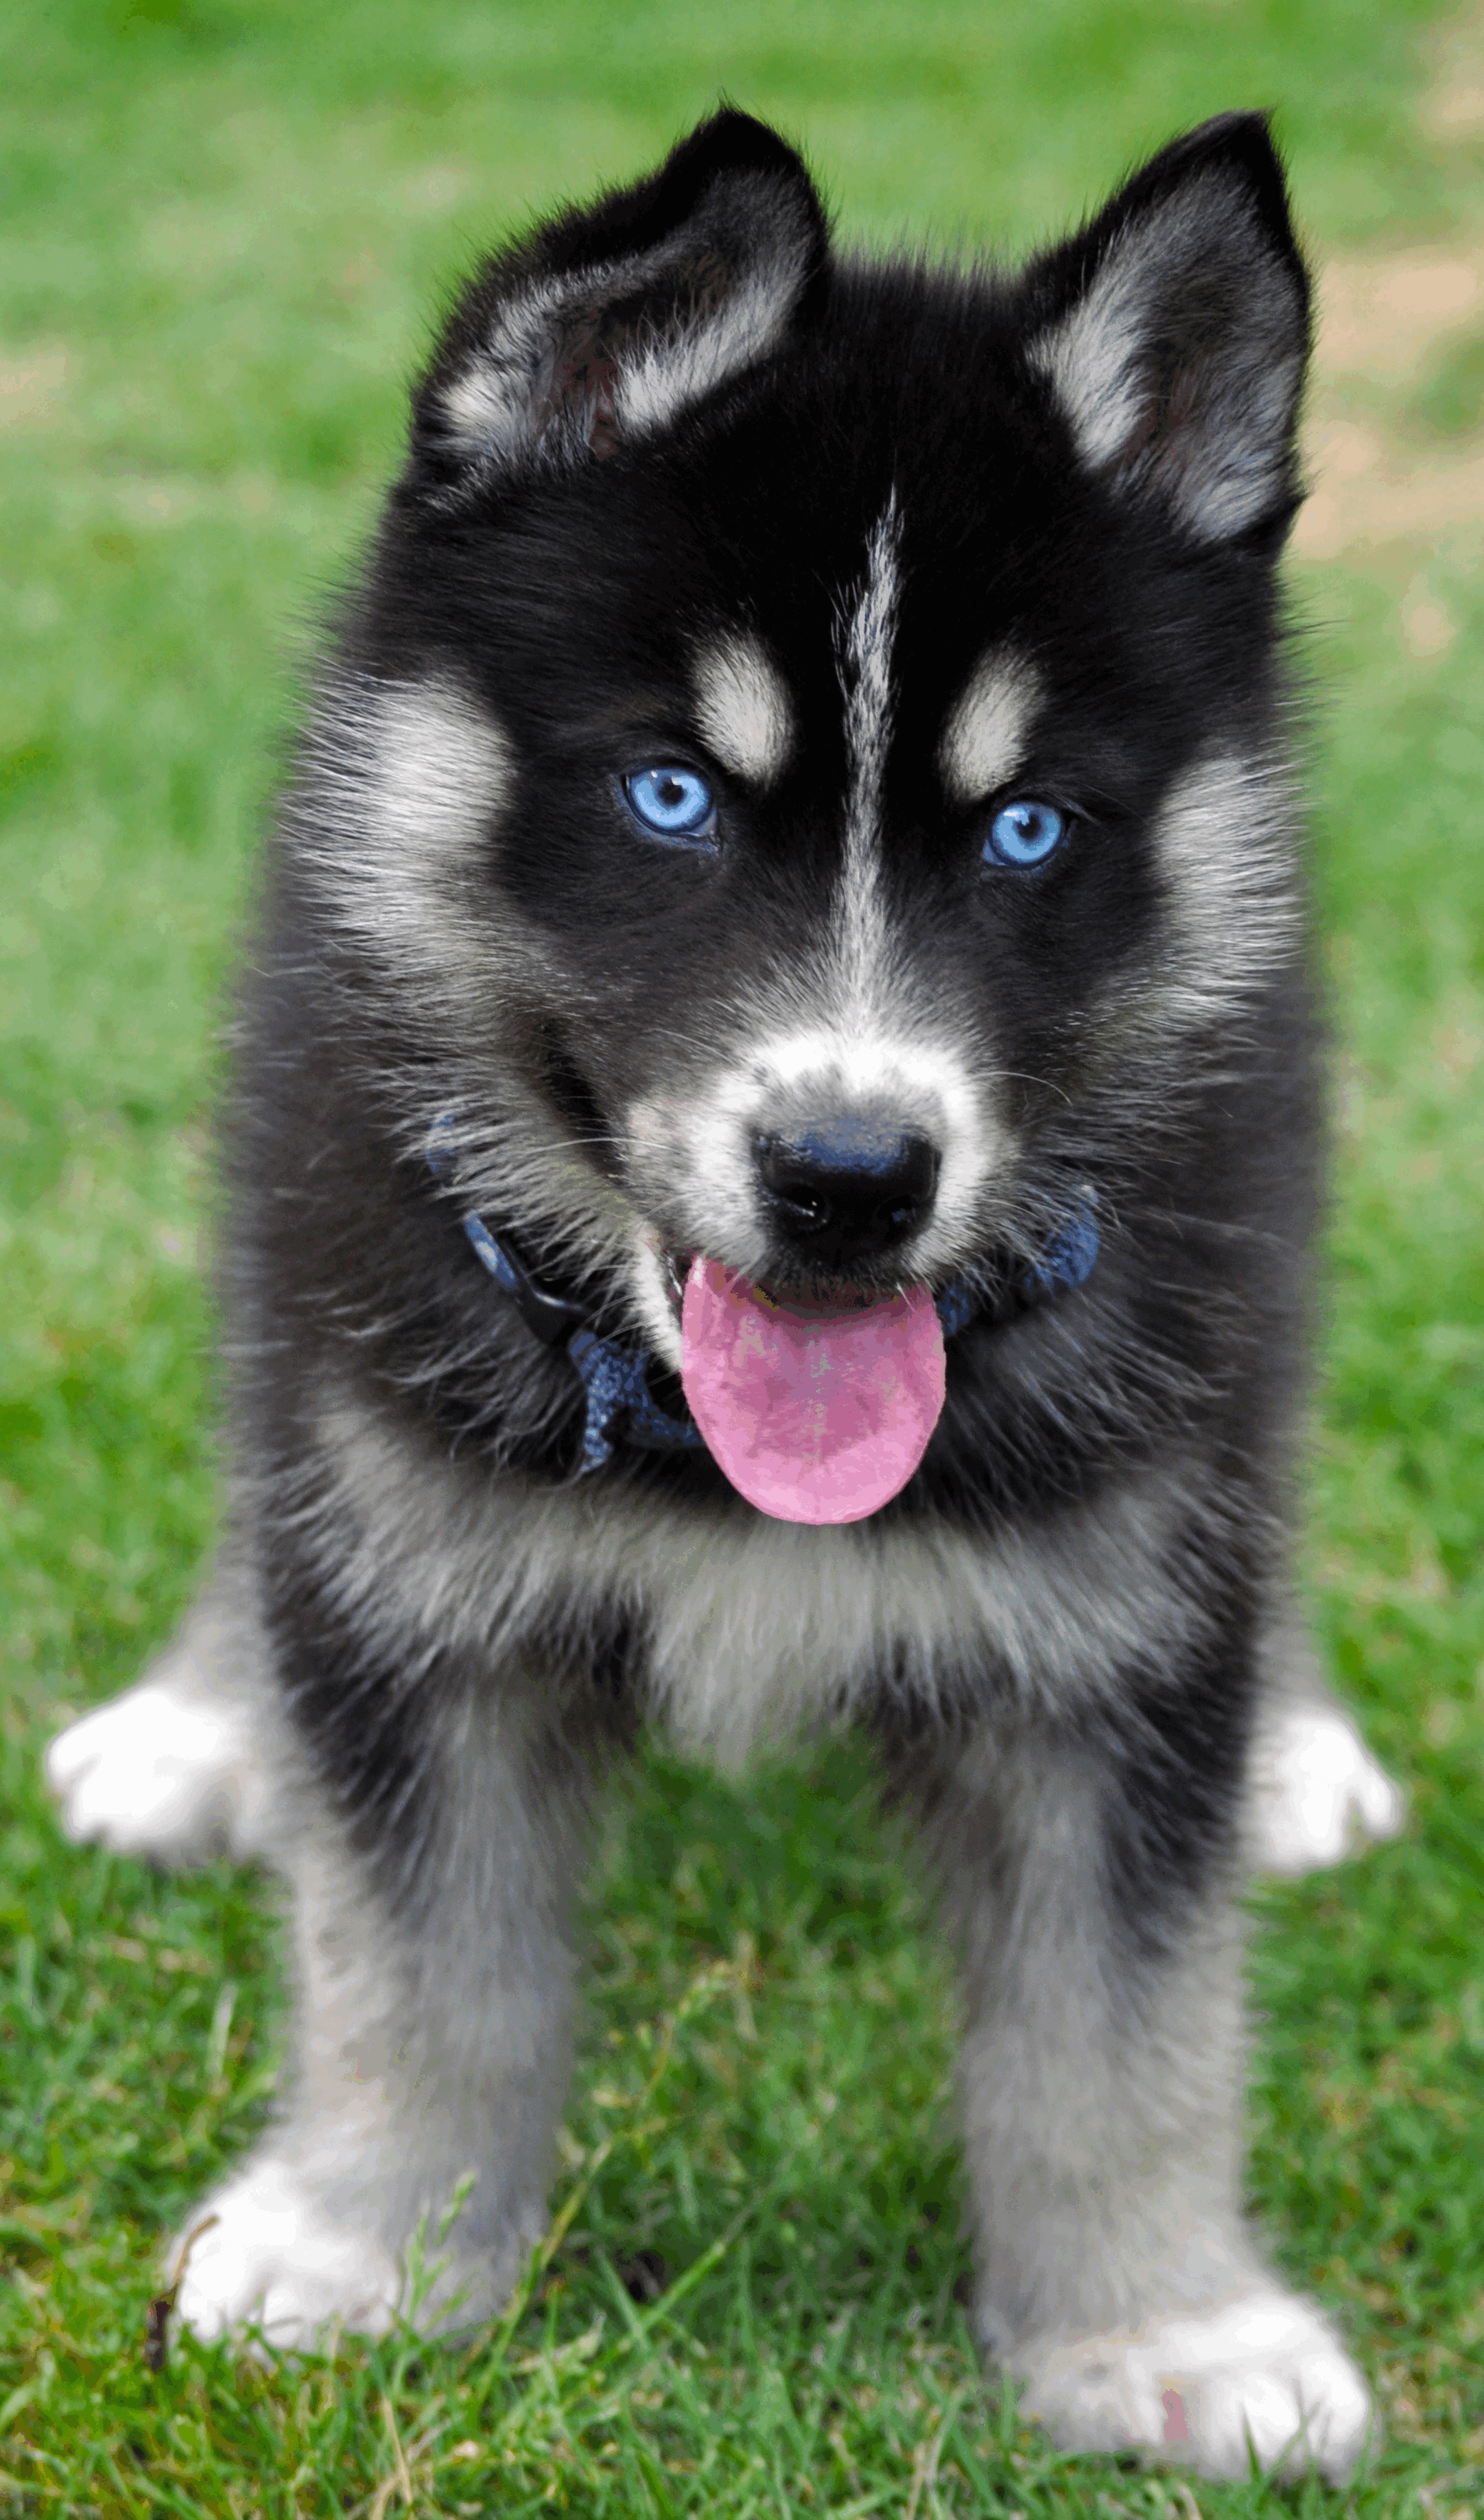 Gerberian Shepsky puppy with blue eyes standing on the grass with its tongue out